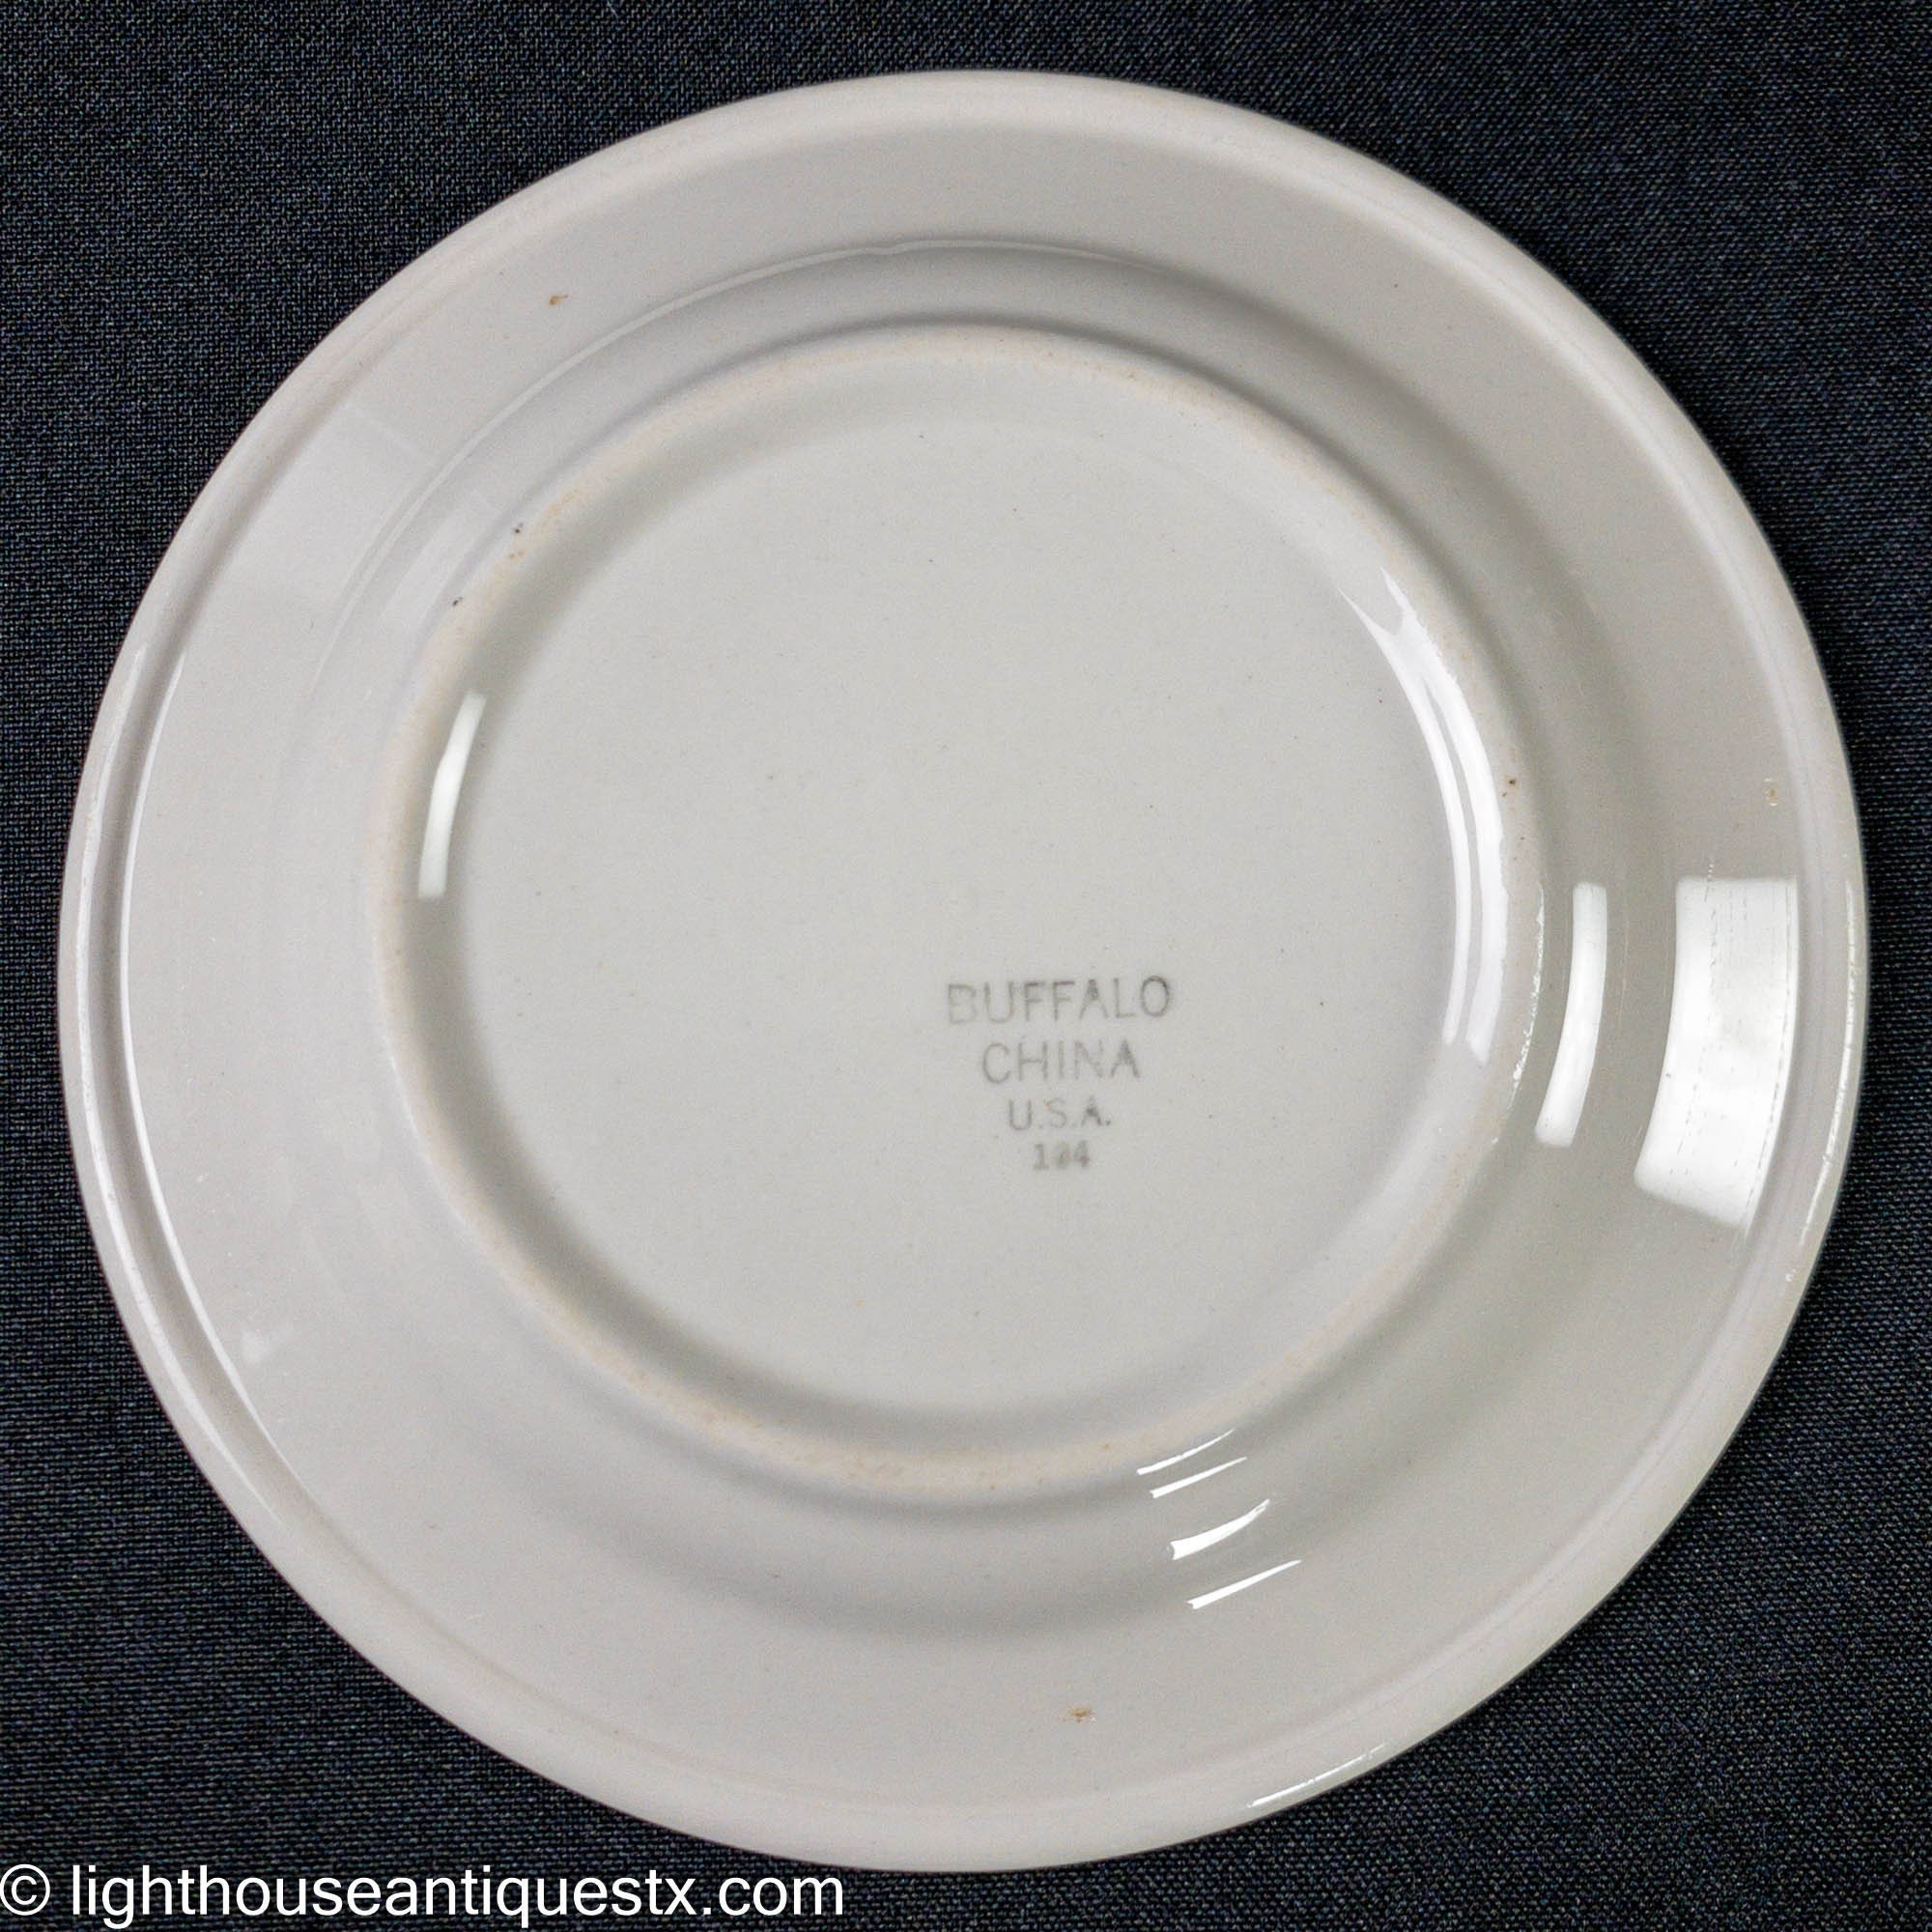 1928 Equestrian Horse Theme Restaurant Ware 6 14 Bread Side Plate By OPCo Syracuse China